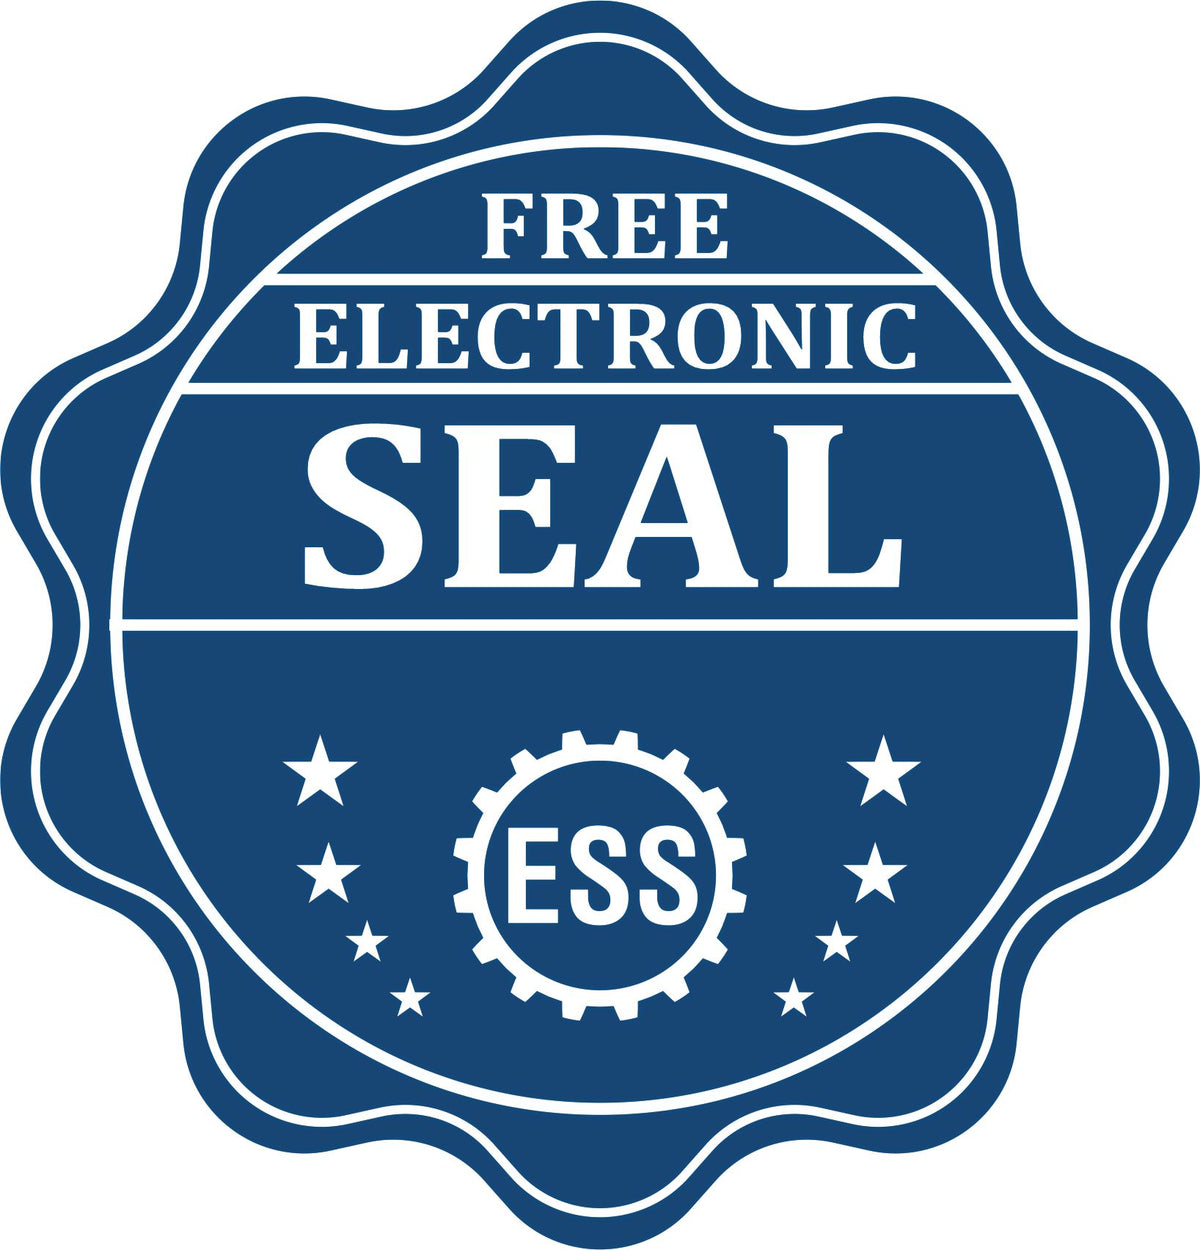 A badge showing a free electronic seal for the Long Reach Kentucky PE Seal with stars and the ESS gear on the emblem.